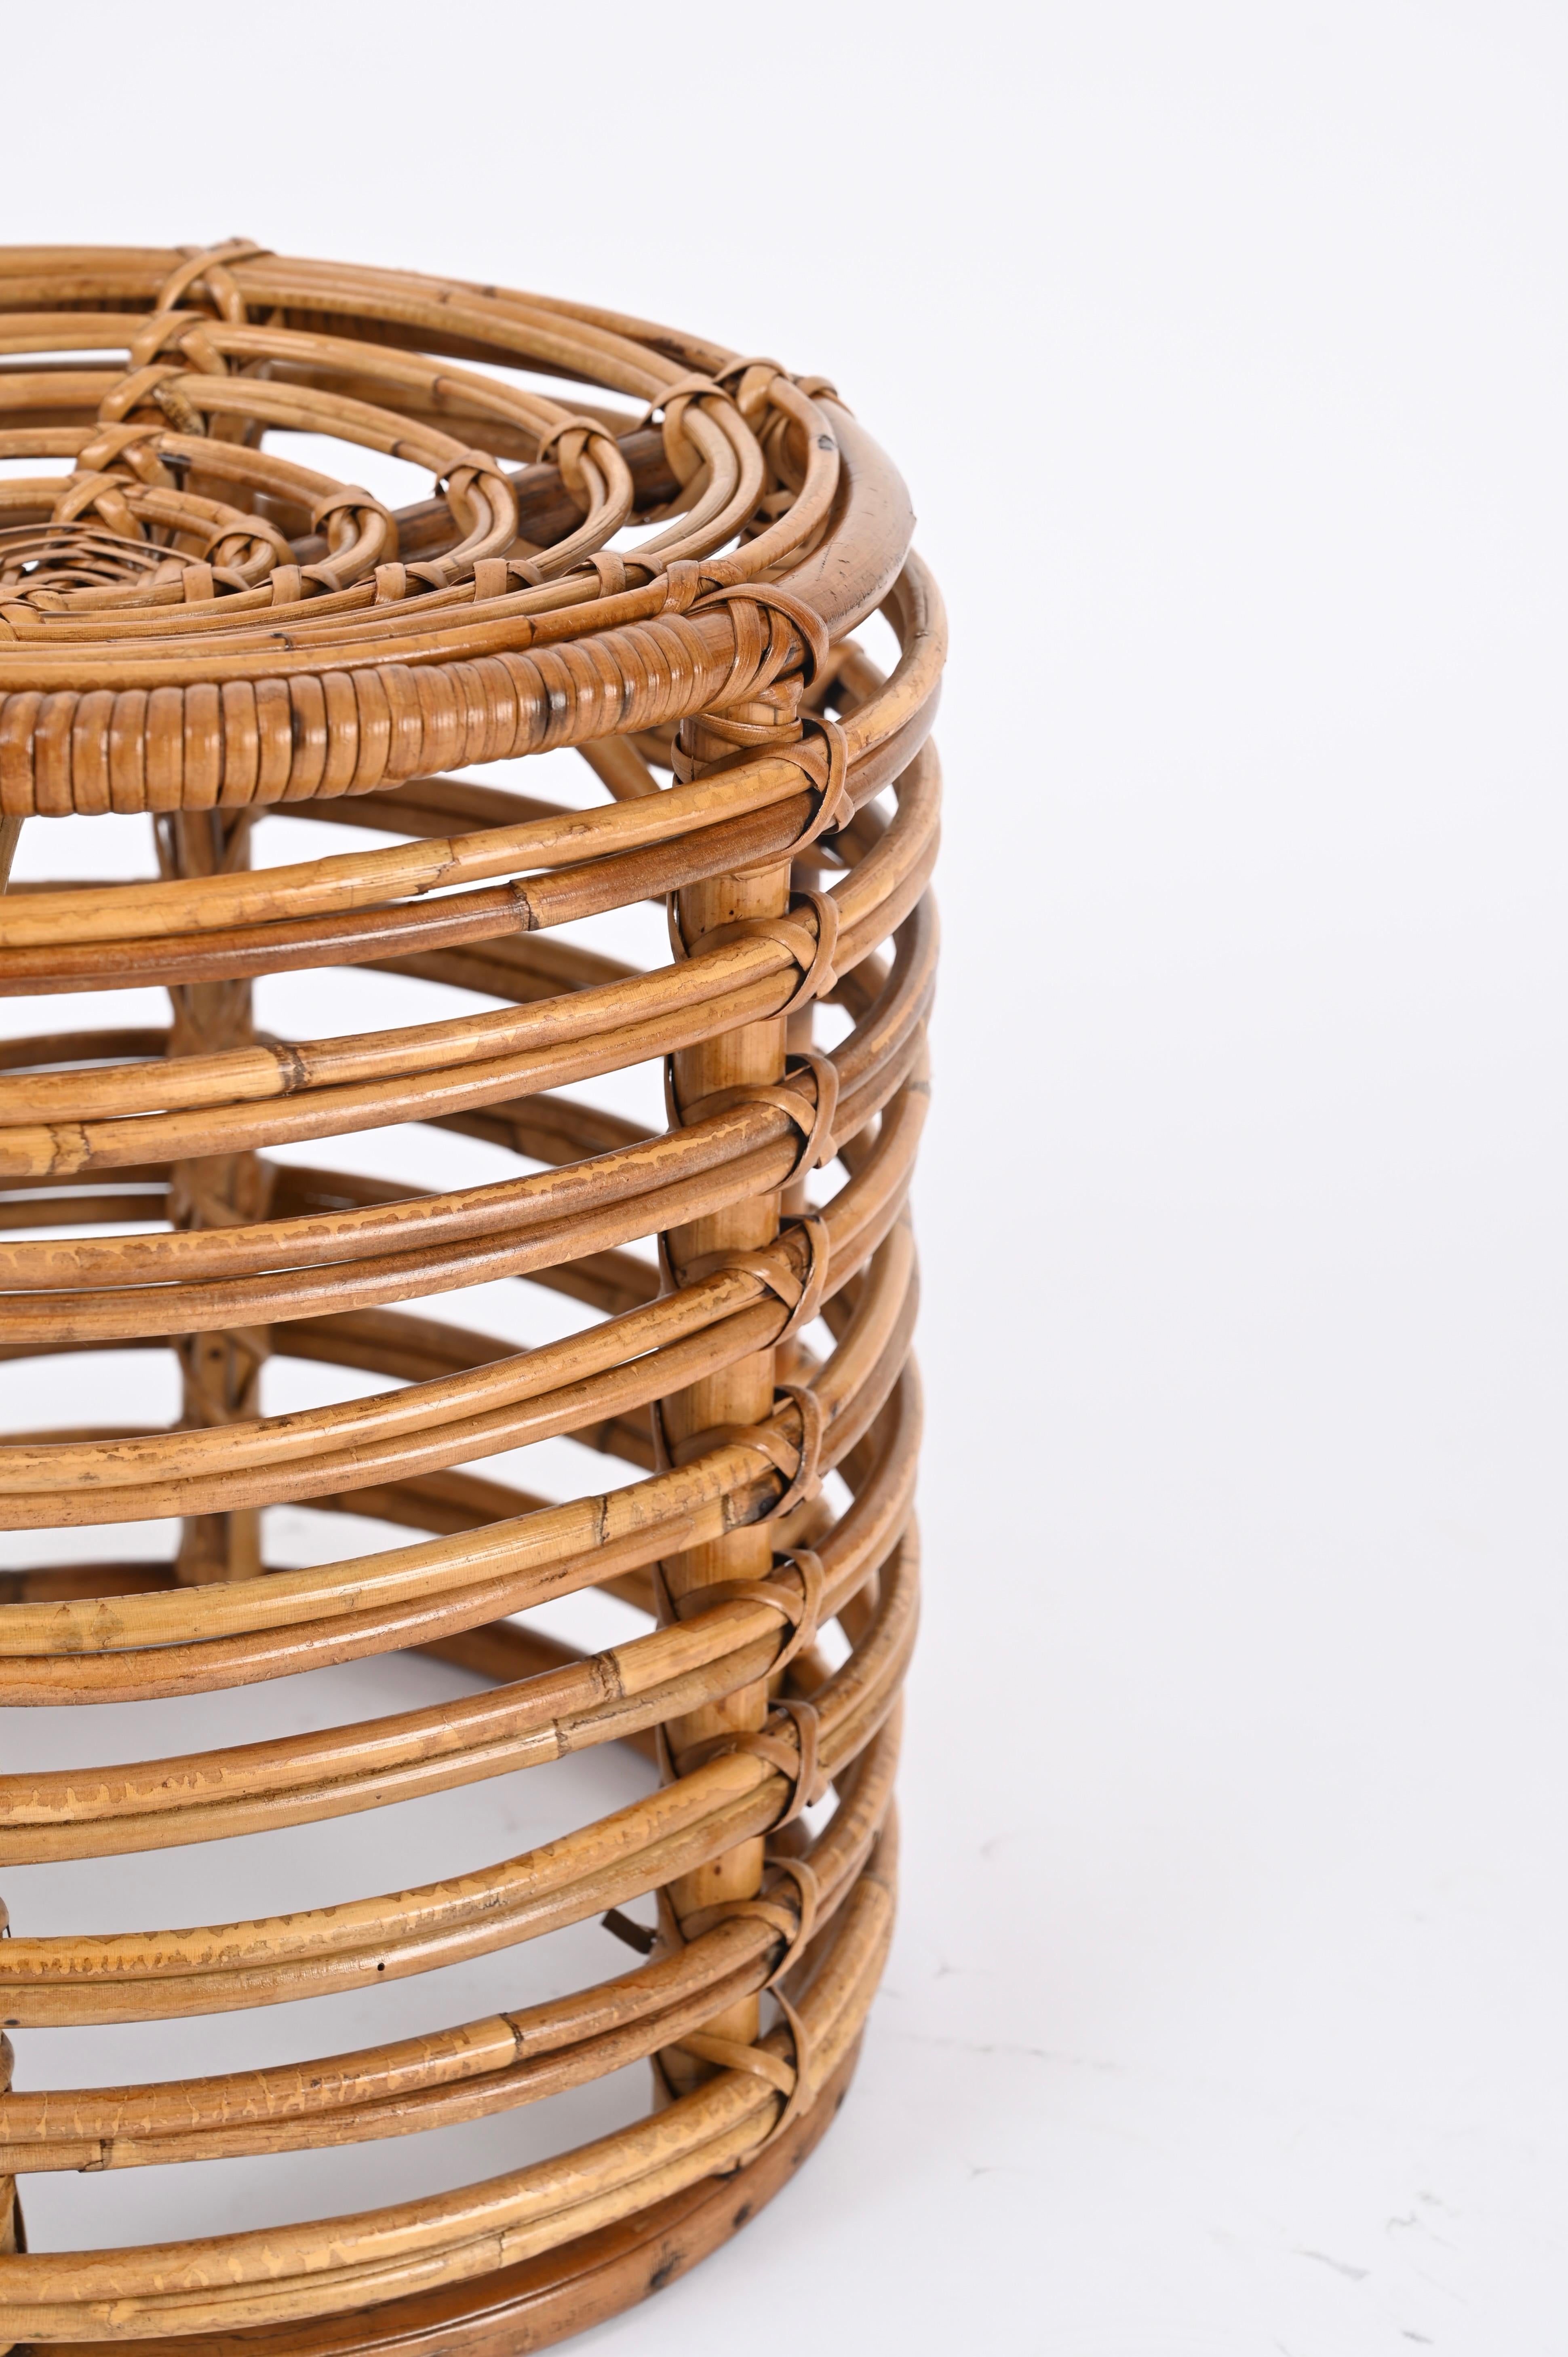 Midcentury Tito Agnoli Rattan and Wicker Round Pouf Stool, Italy, 1970s For Sale